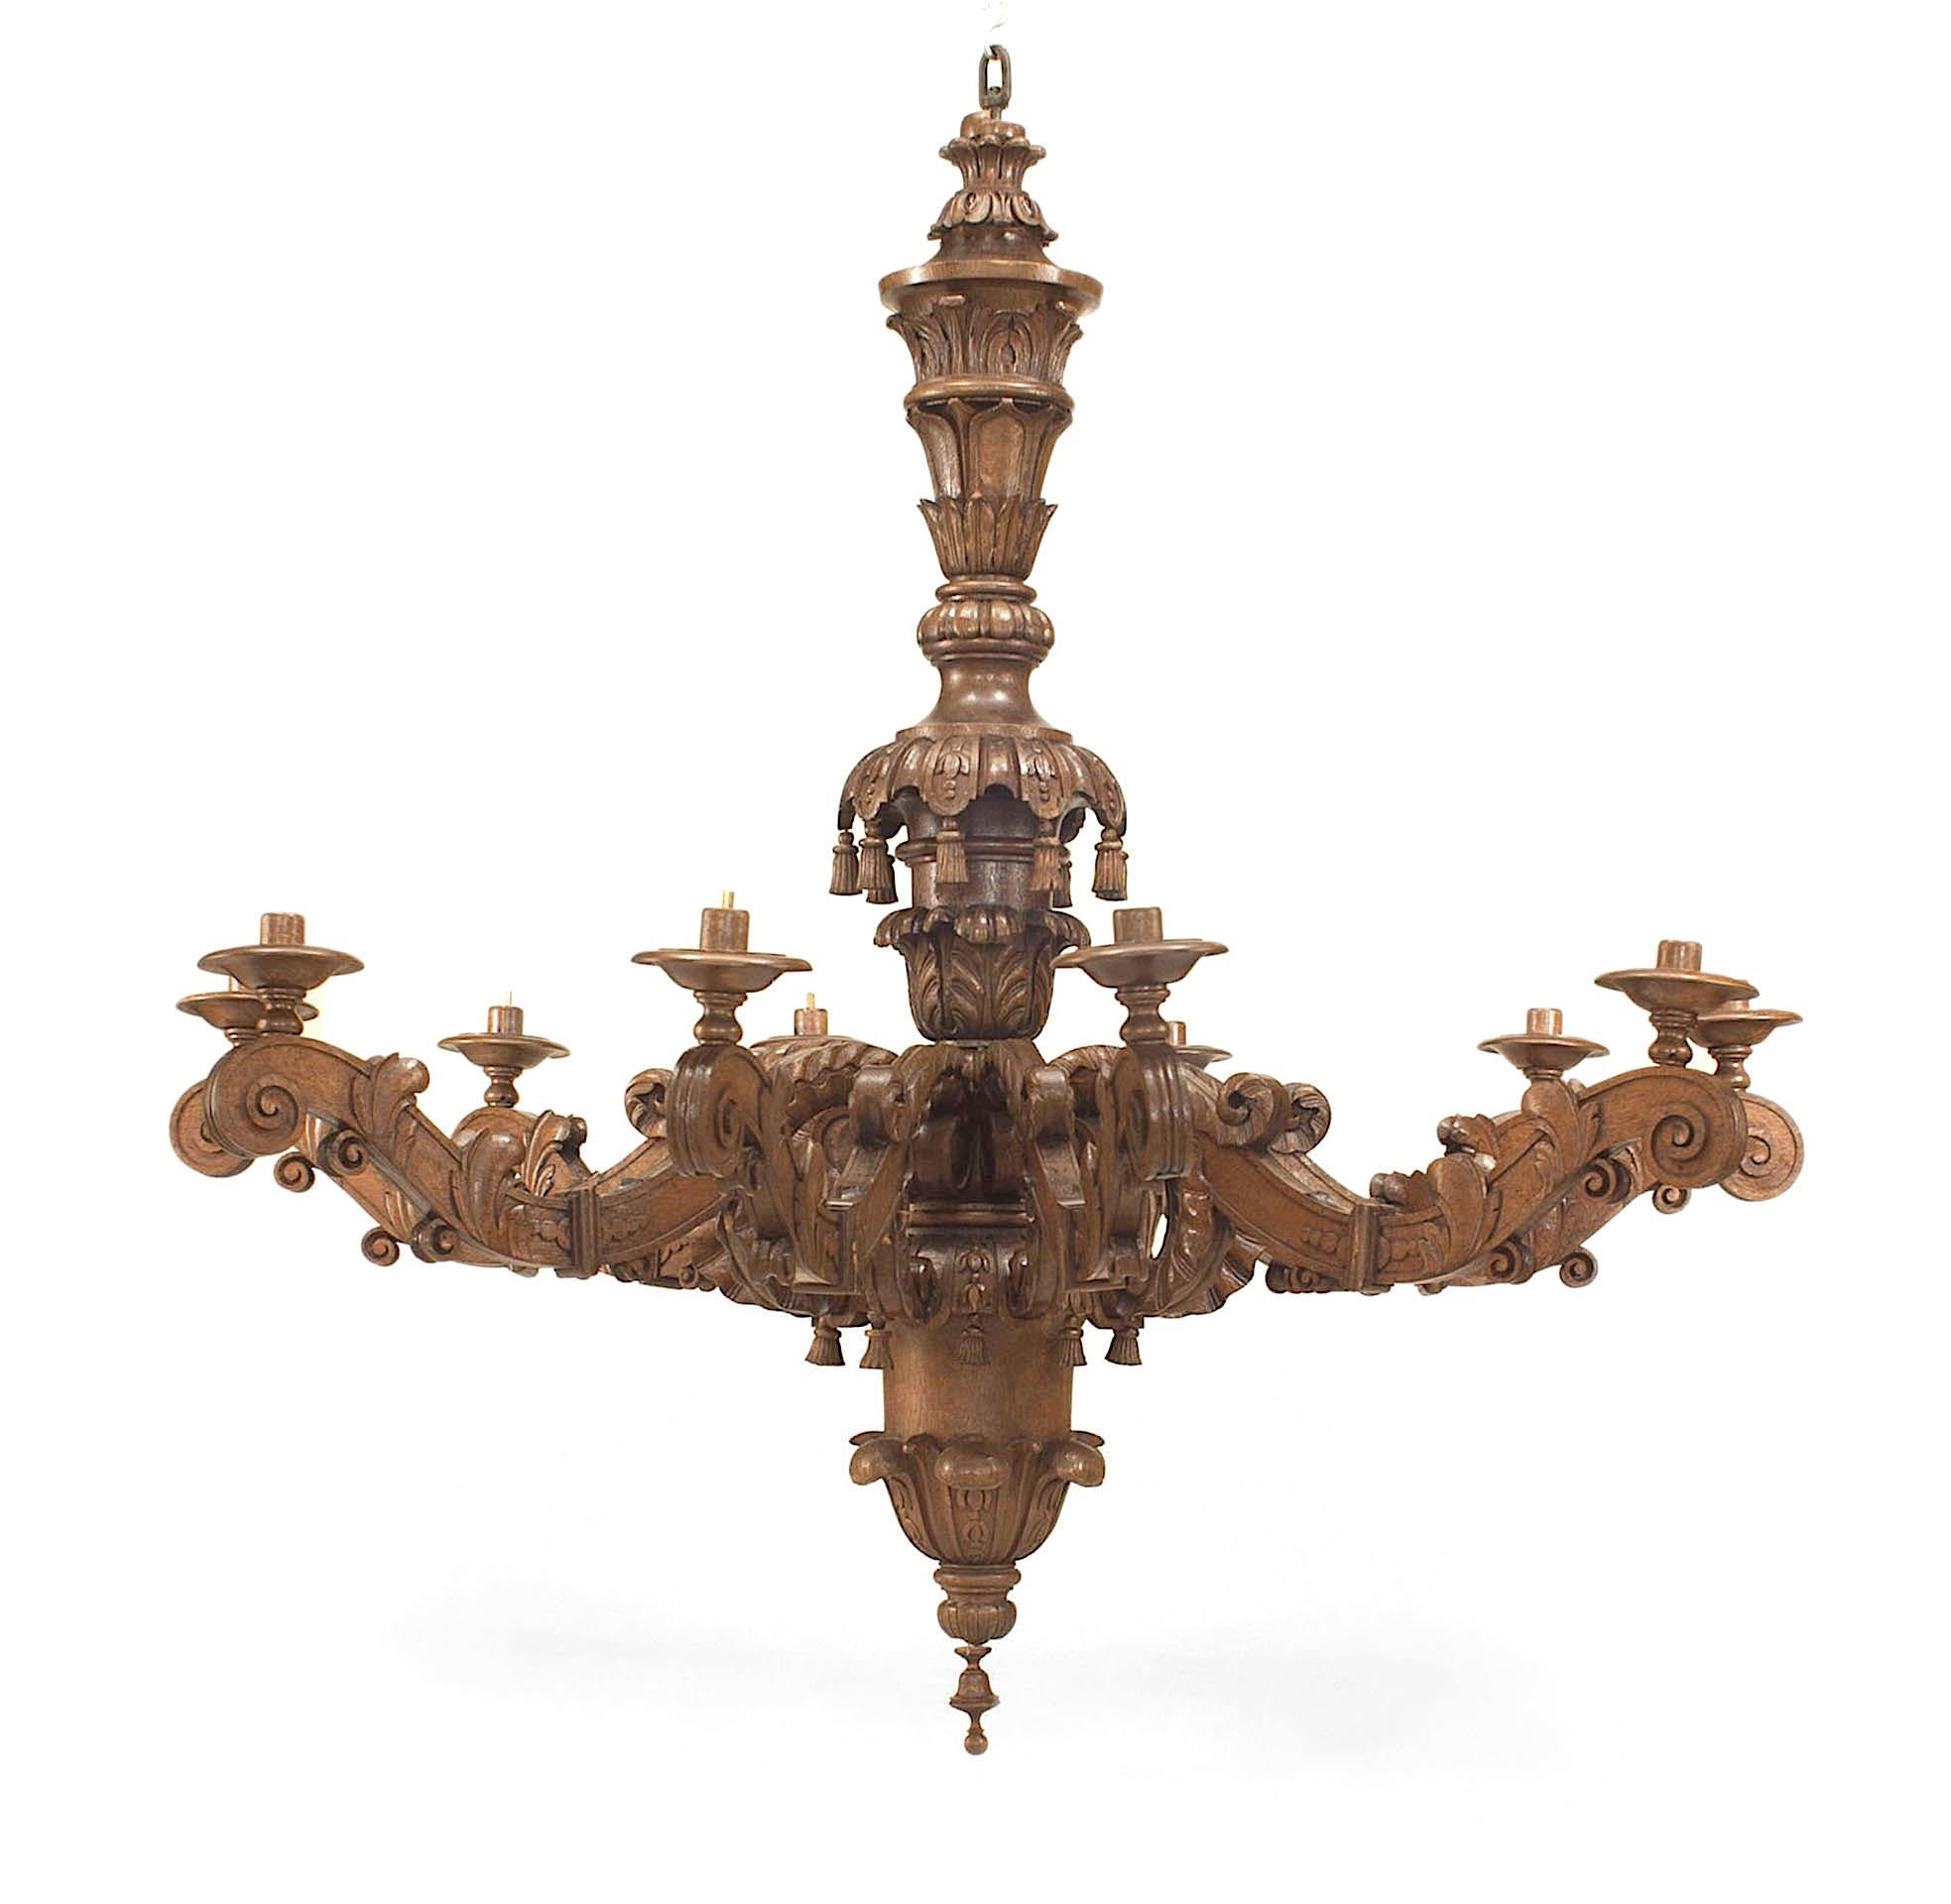 2 Italian Rococo style (19th Century) large carved oak chandeliers with 10 scroll arms emanating from a carved center post with carved tassel trim. (PRICED EACH)
